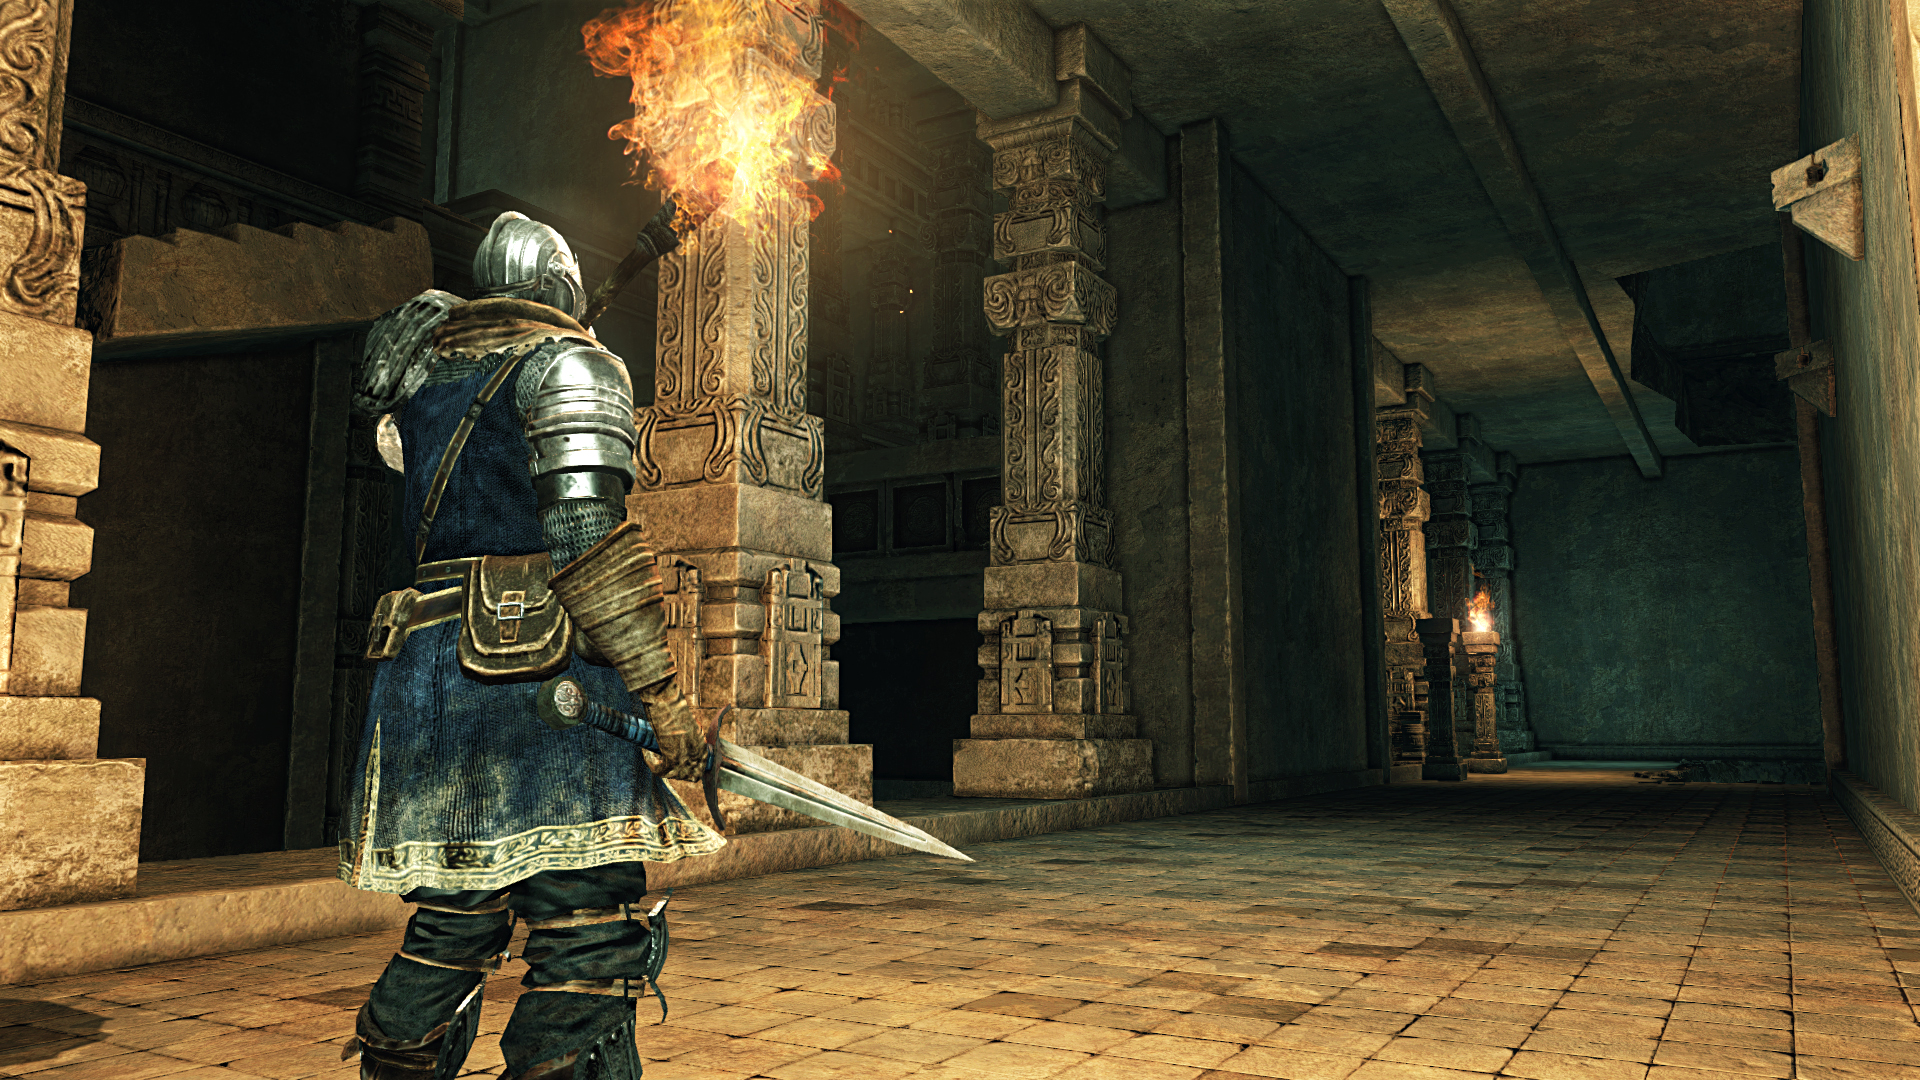 Souls 2 fans started a petition to bring back long-lost weapons | GamesRadar+